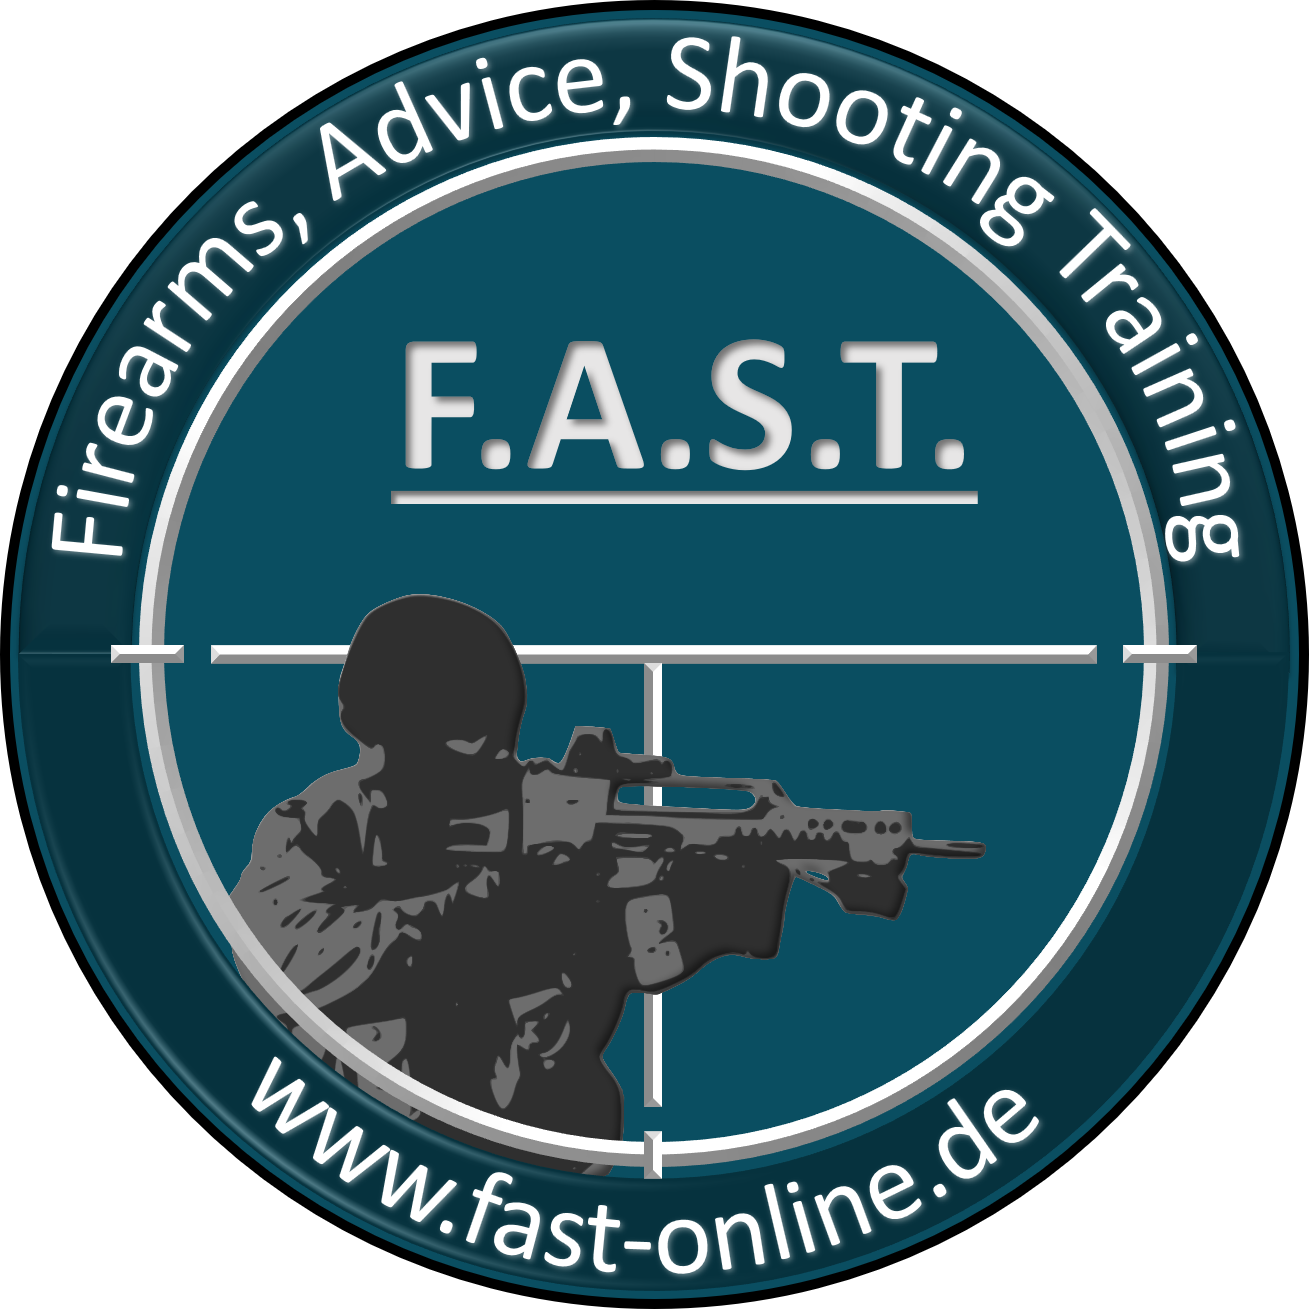 F.A.S.T. Shooting